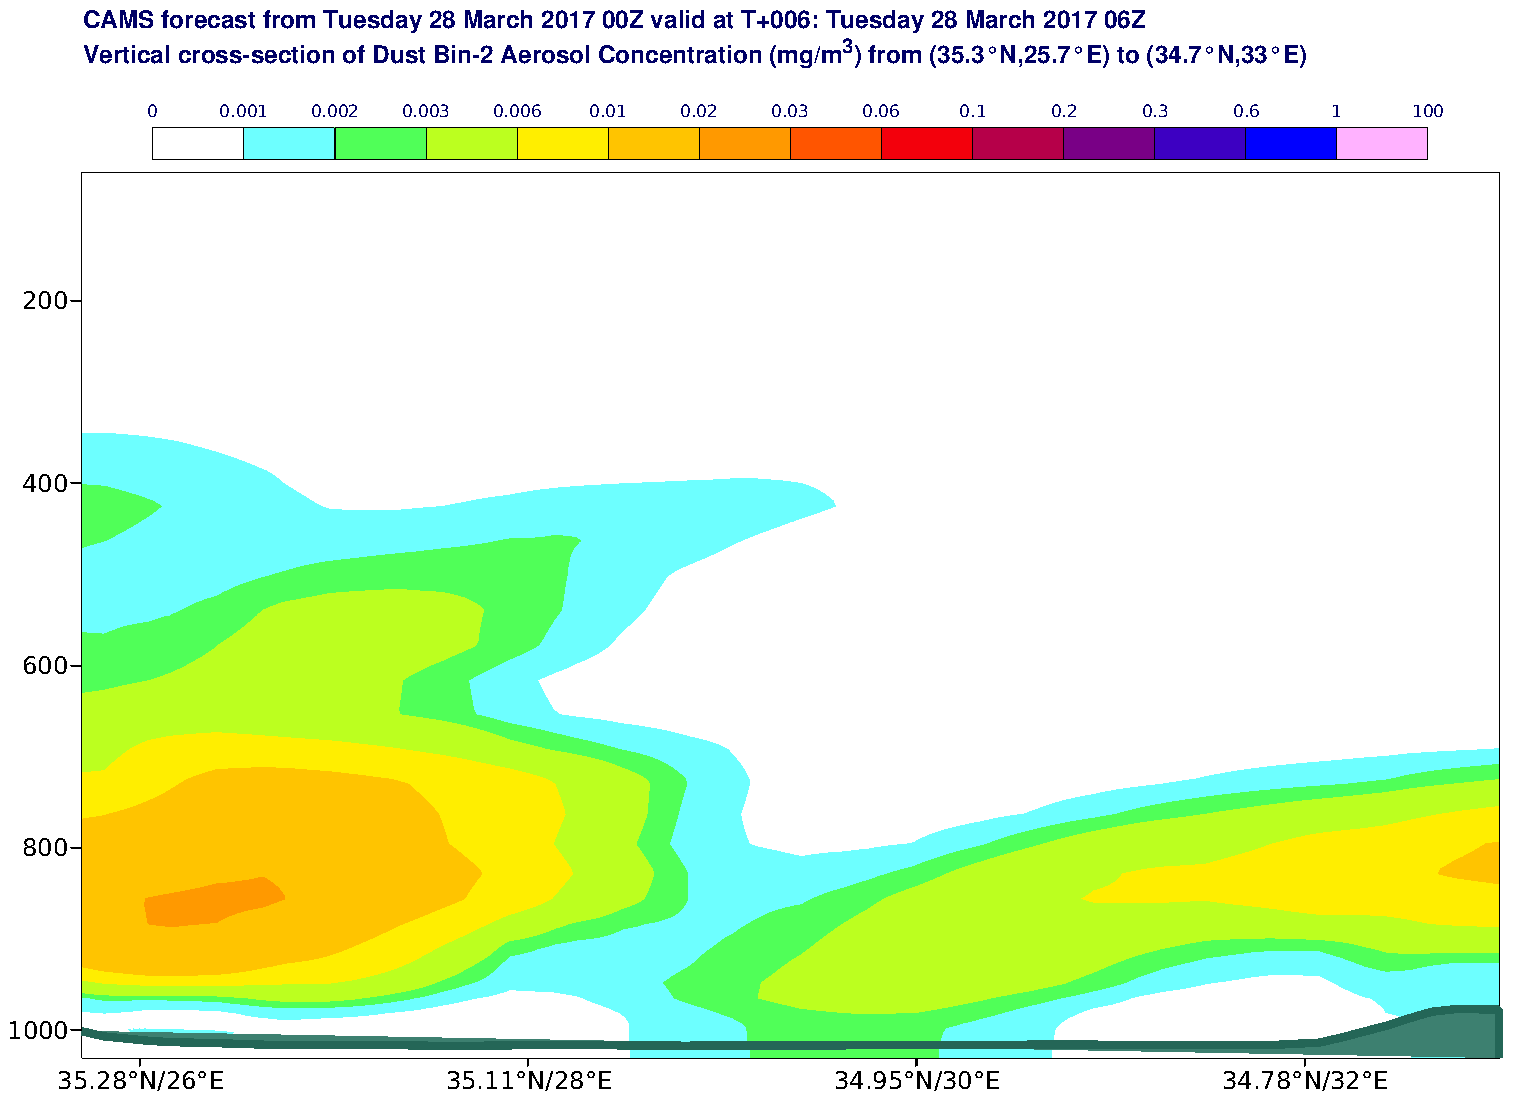 Vertical cross-section of Dust Bin-2 Aerosol Concentration (mg/m3) valid at T6 - 2017-03-28 06:00